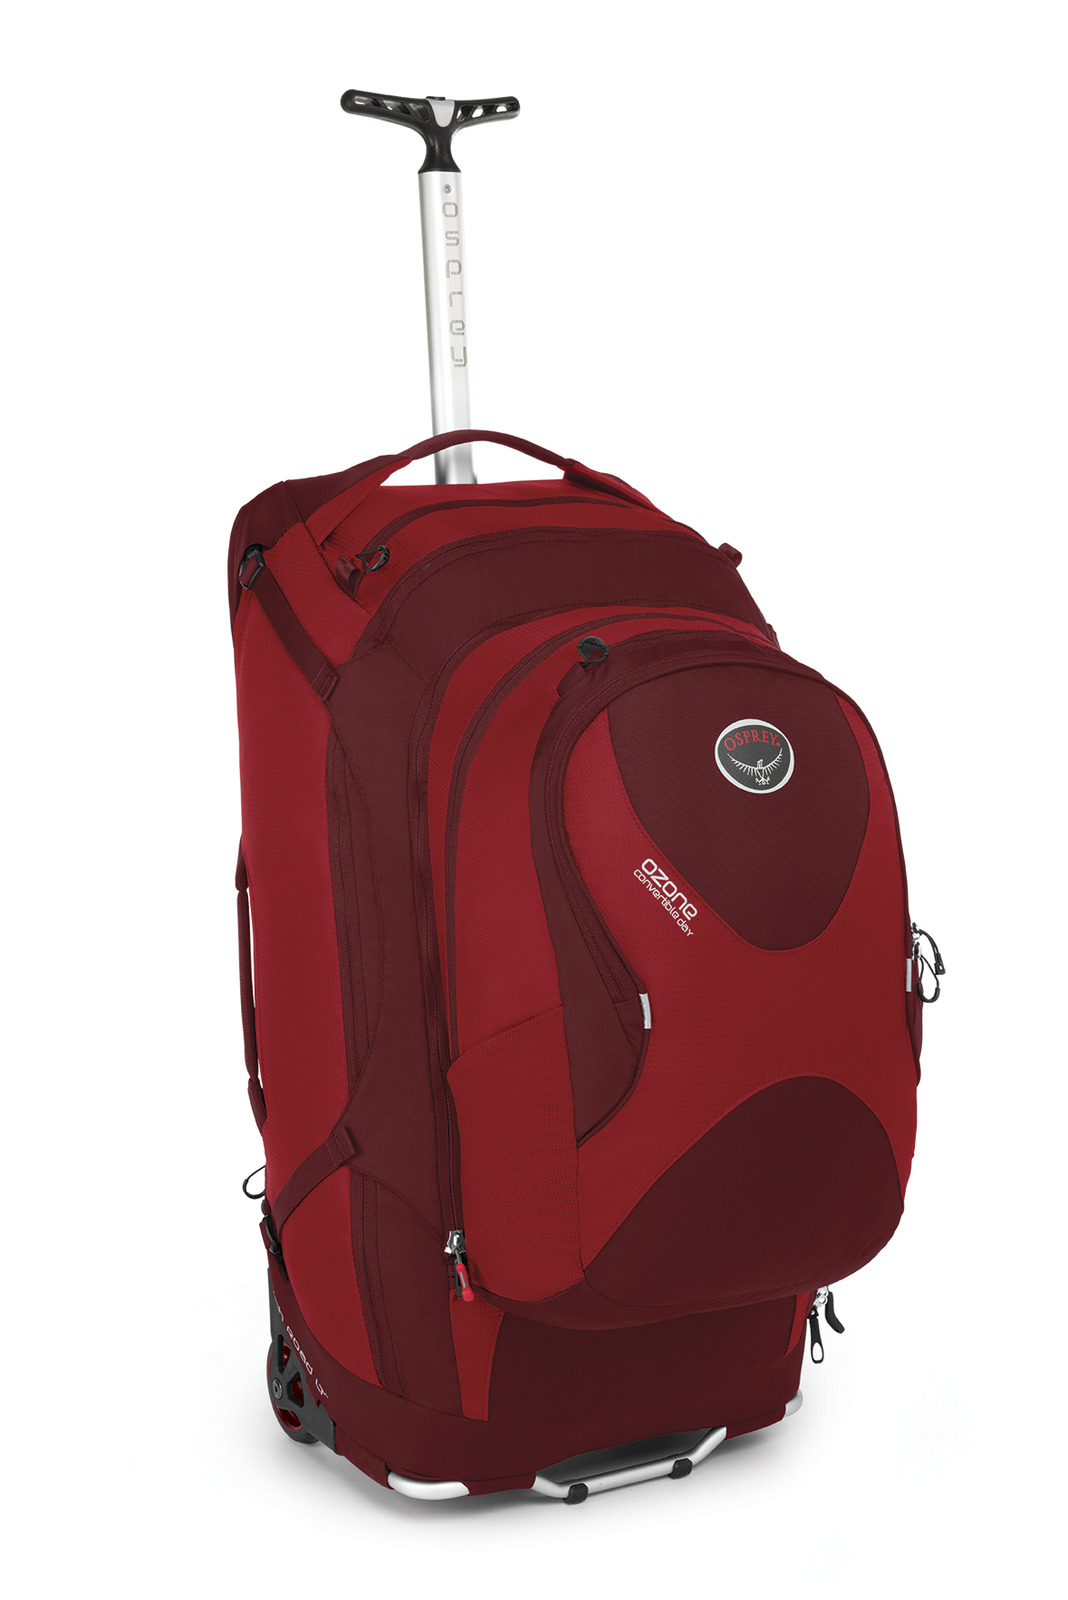 lightweight travel backpack with wheels